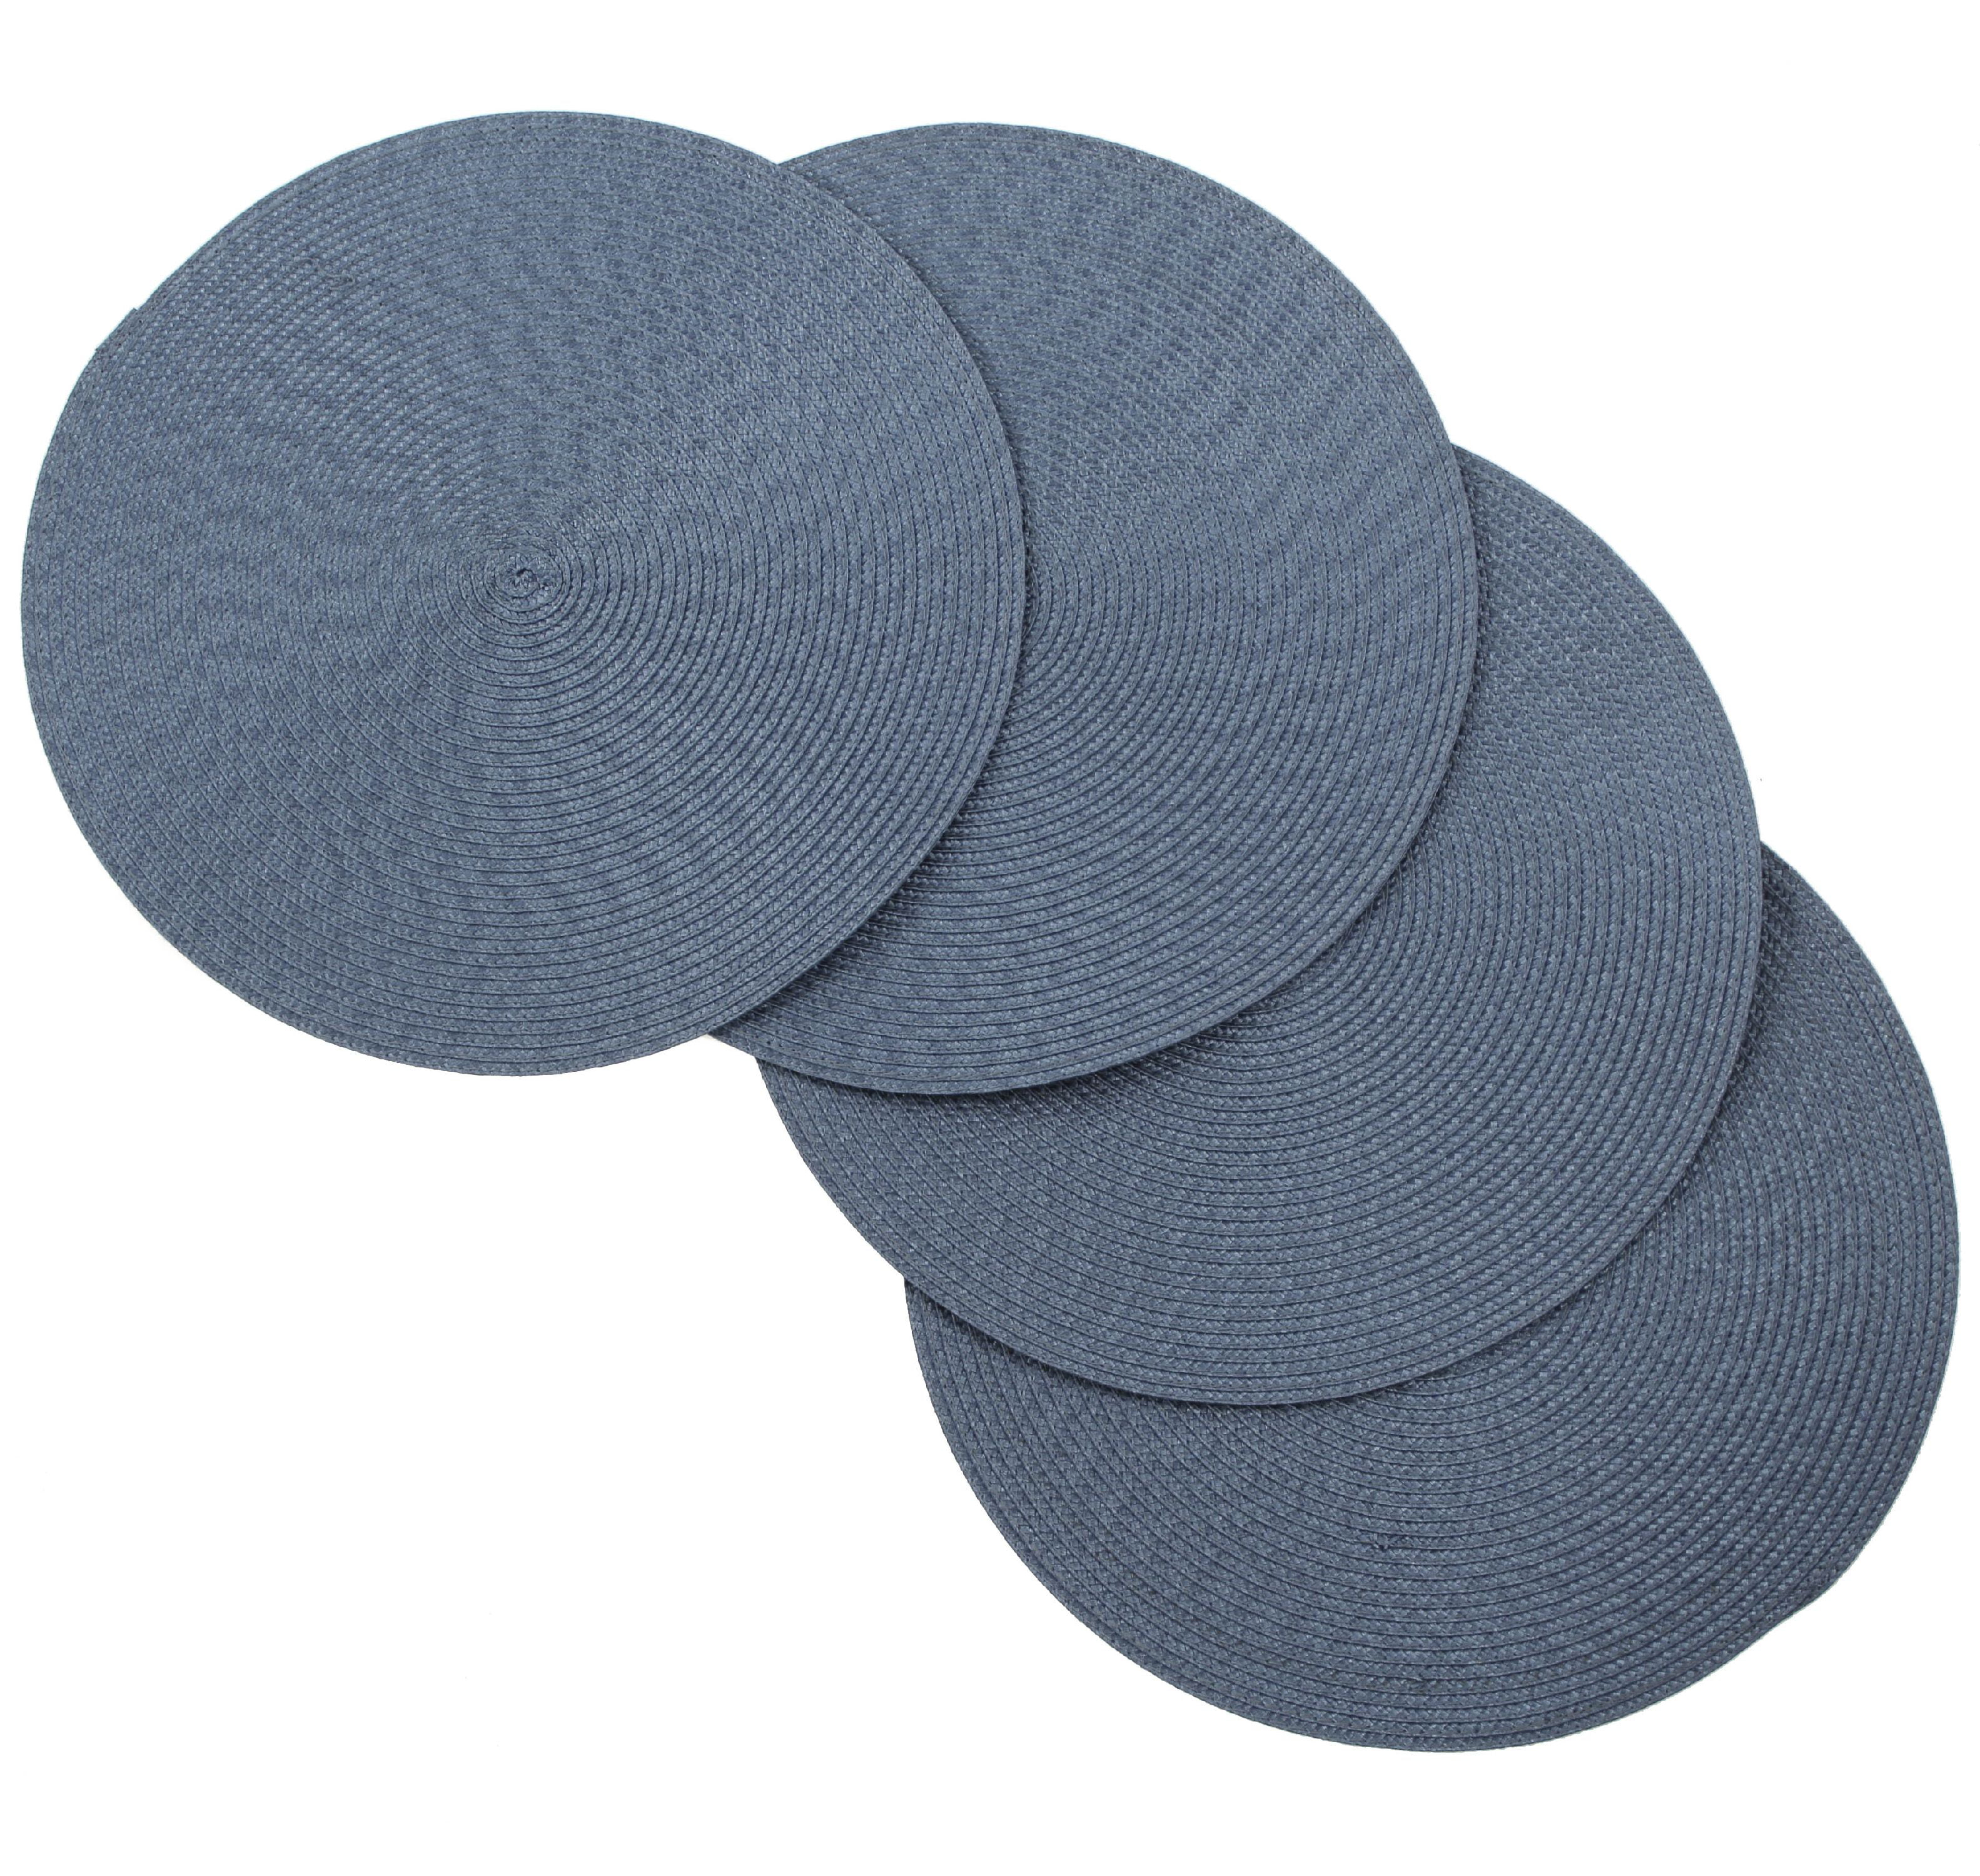 Vienna Woven Spiral Table Placemats 15 Inches Round Set of 4 Non-Slip  Dining & Kitchen Table Mats Navy Blue - Walmart.com